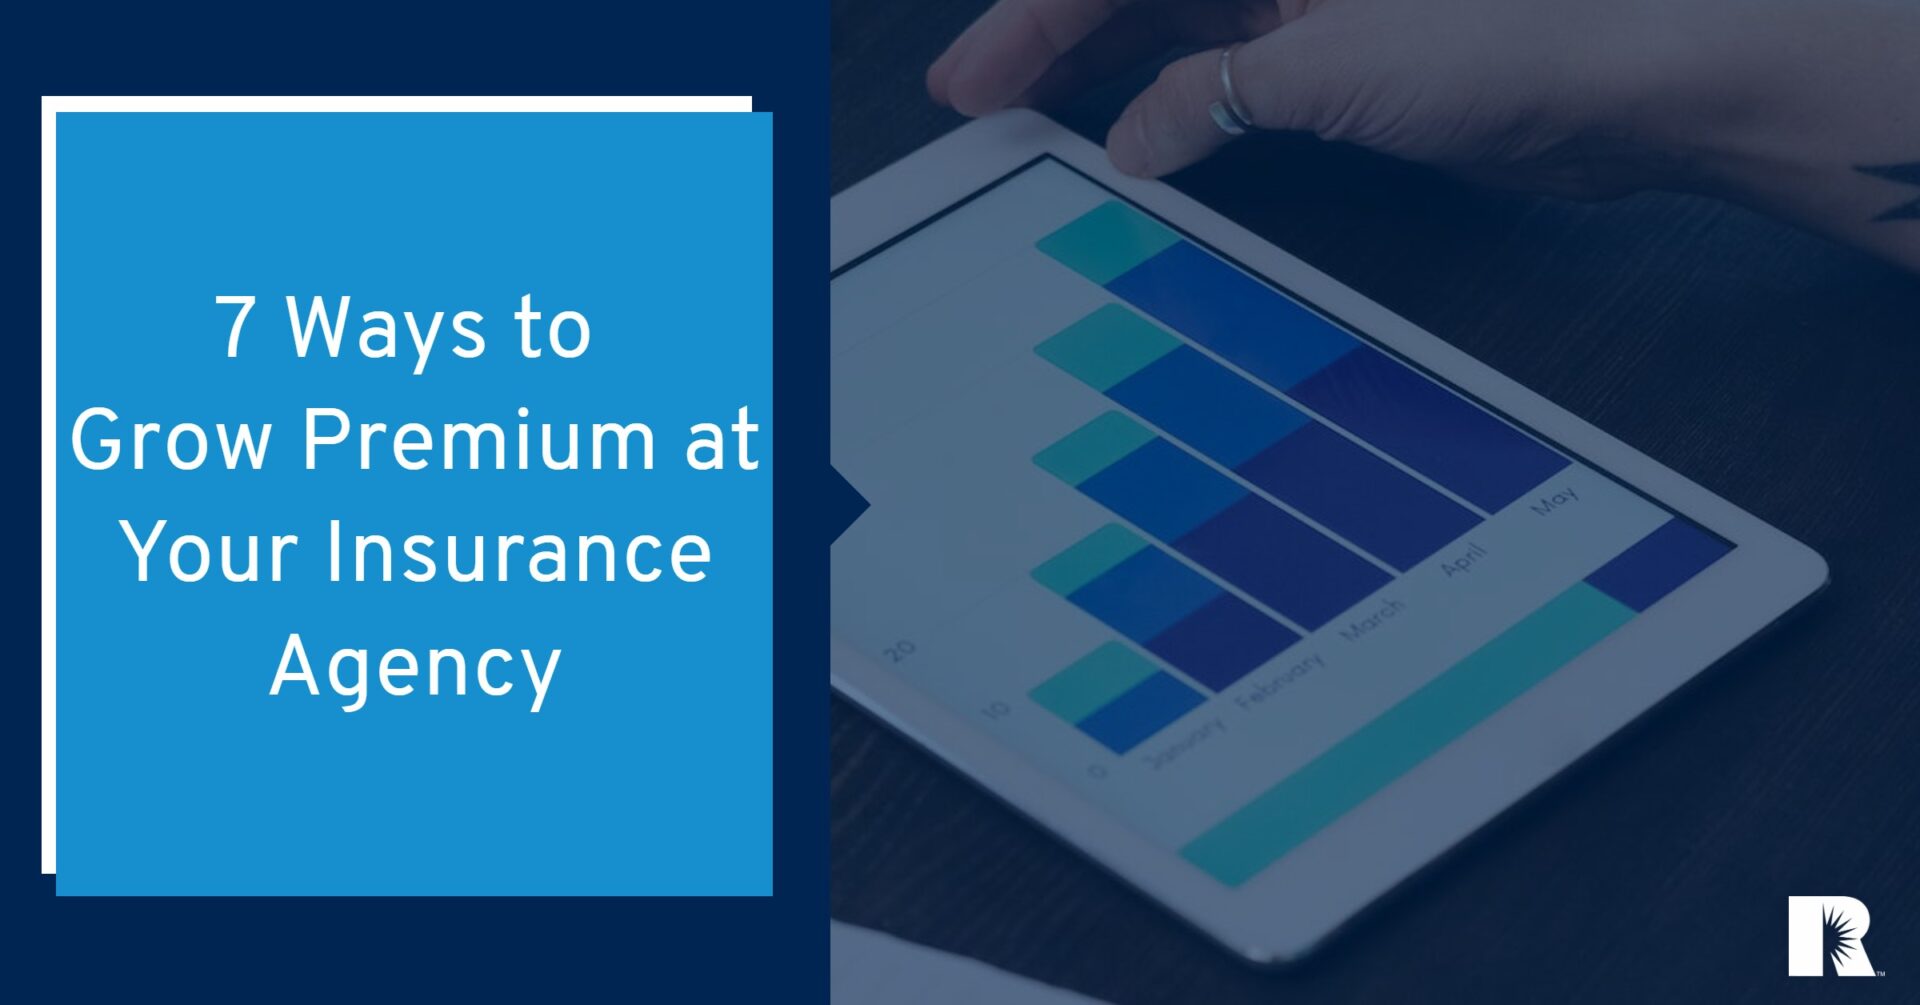 7 Ways to Grow Premium at Your Insurance Agency Blog Image